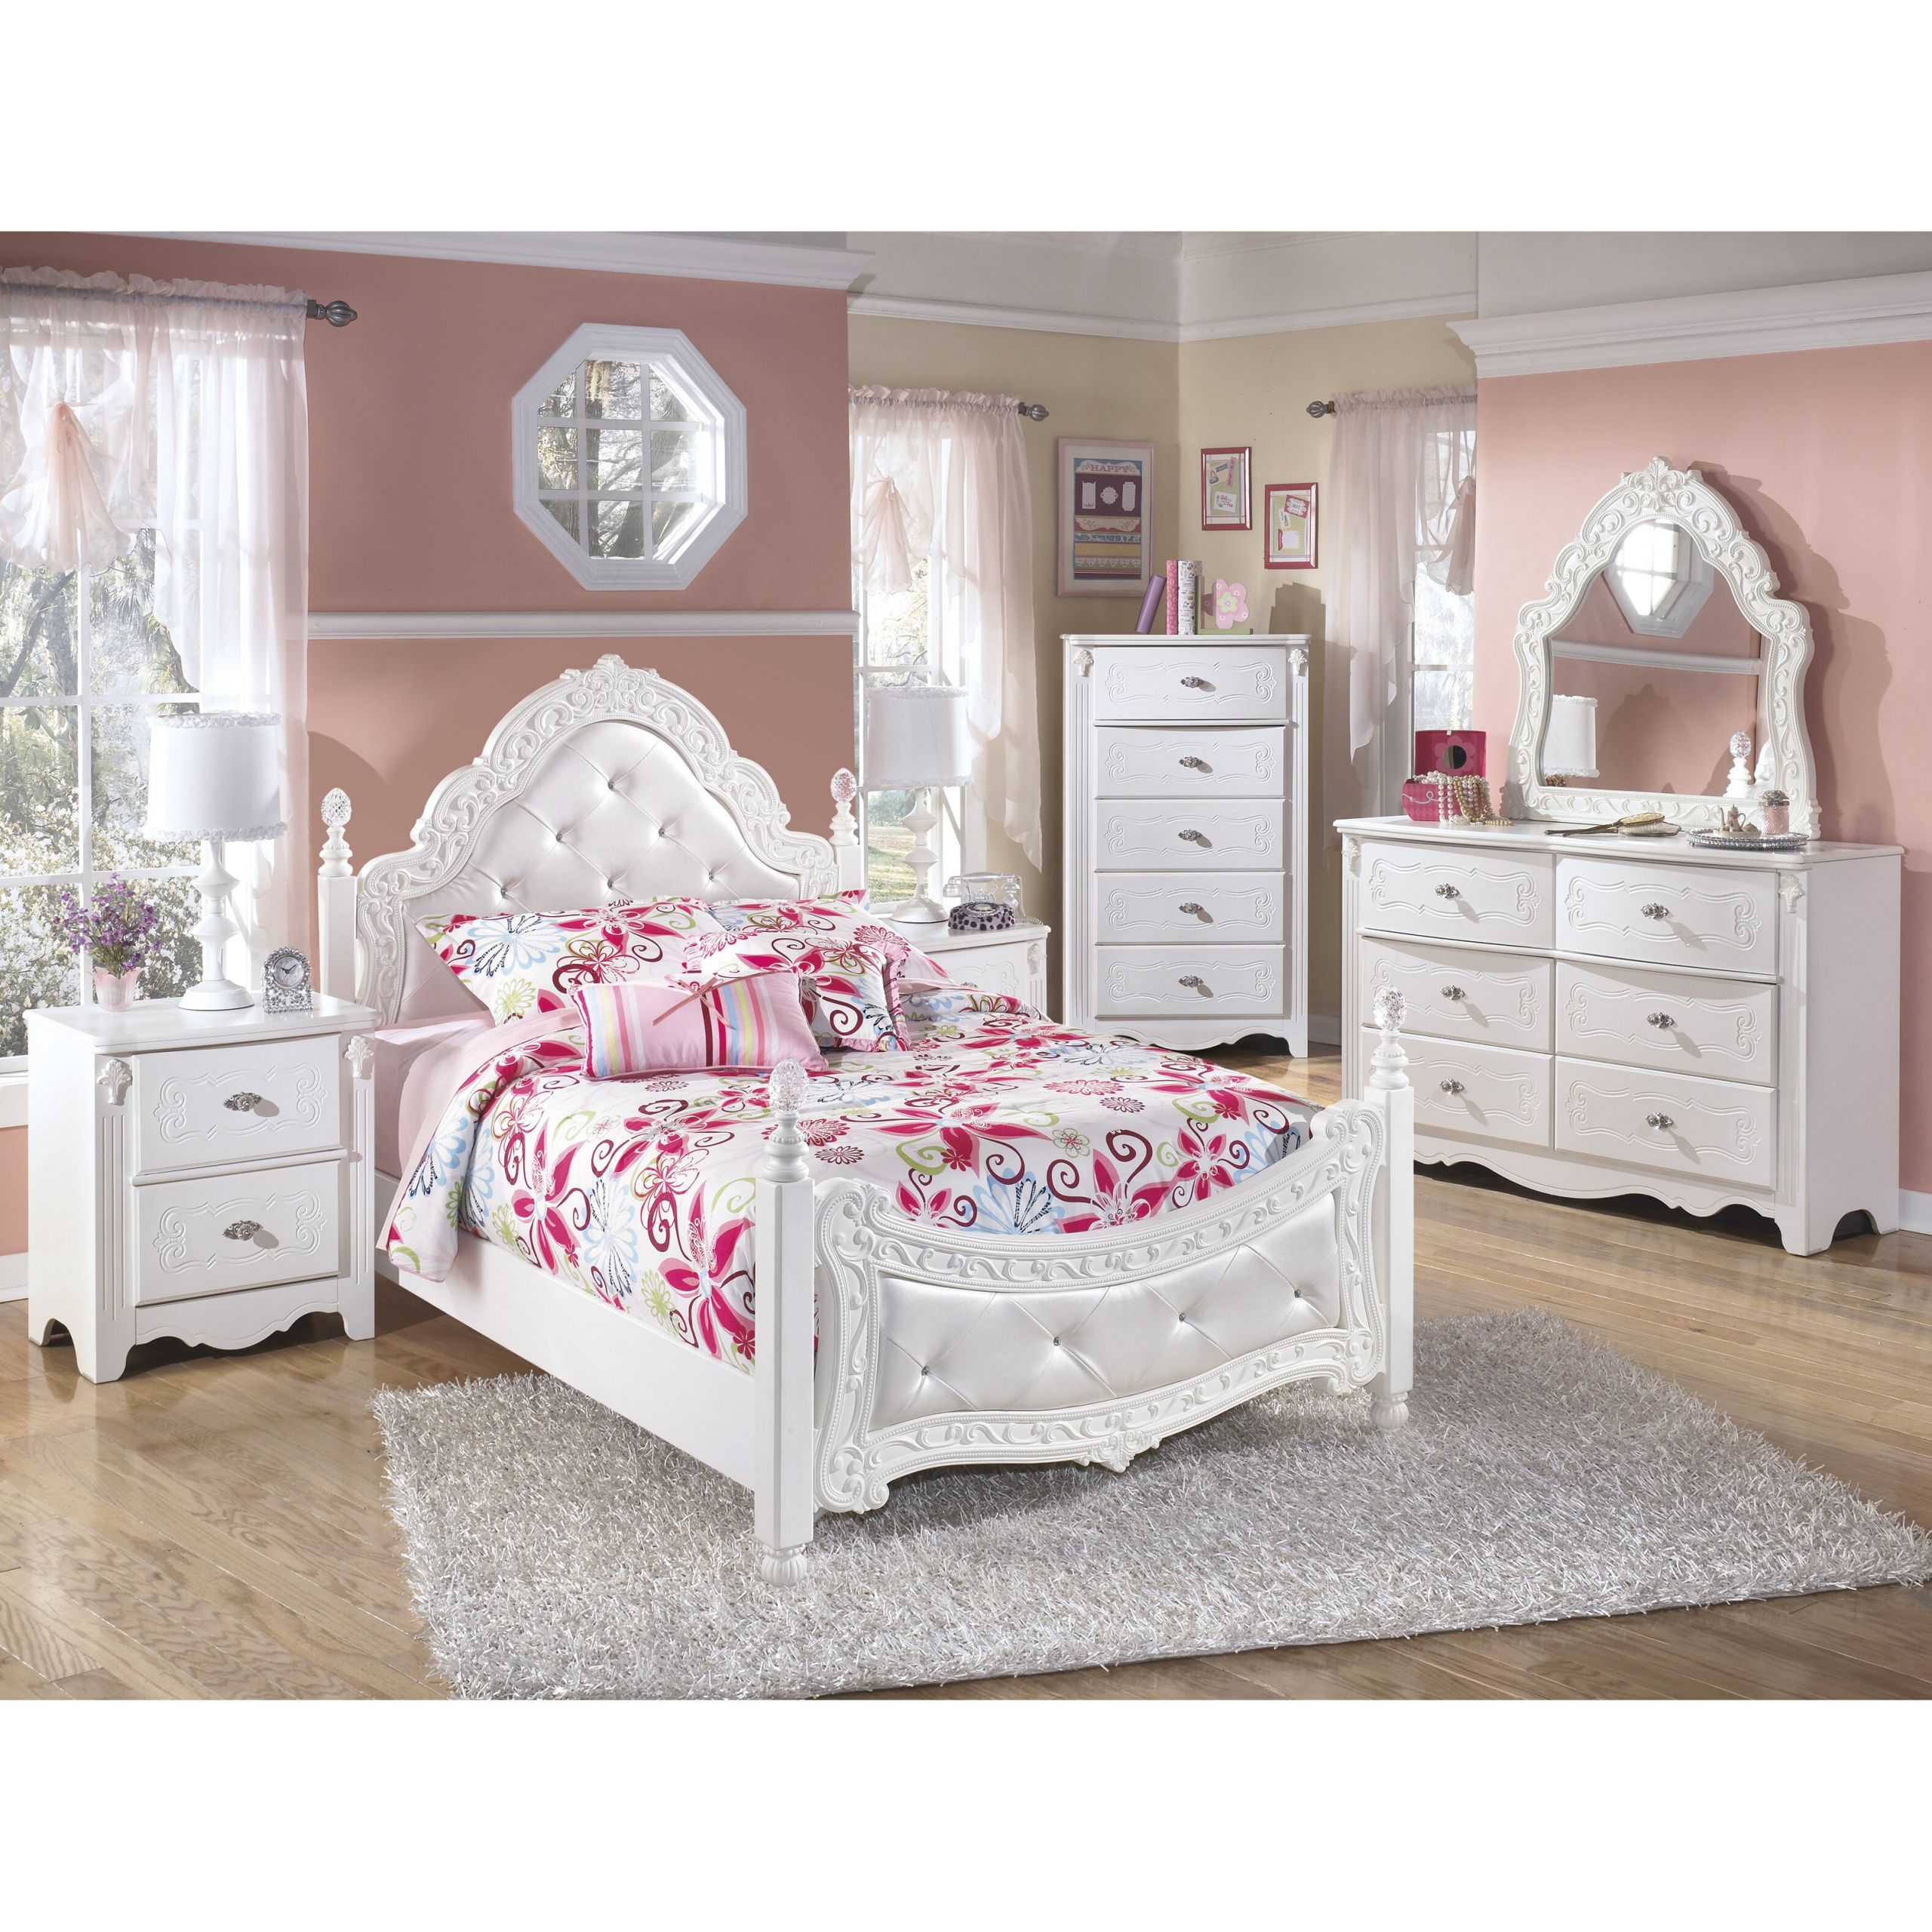 Kids Bedroom Furniture Sets
 Signature Design by Ashley Exquisite Four Poster